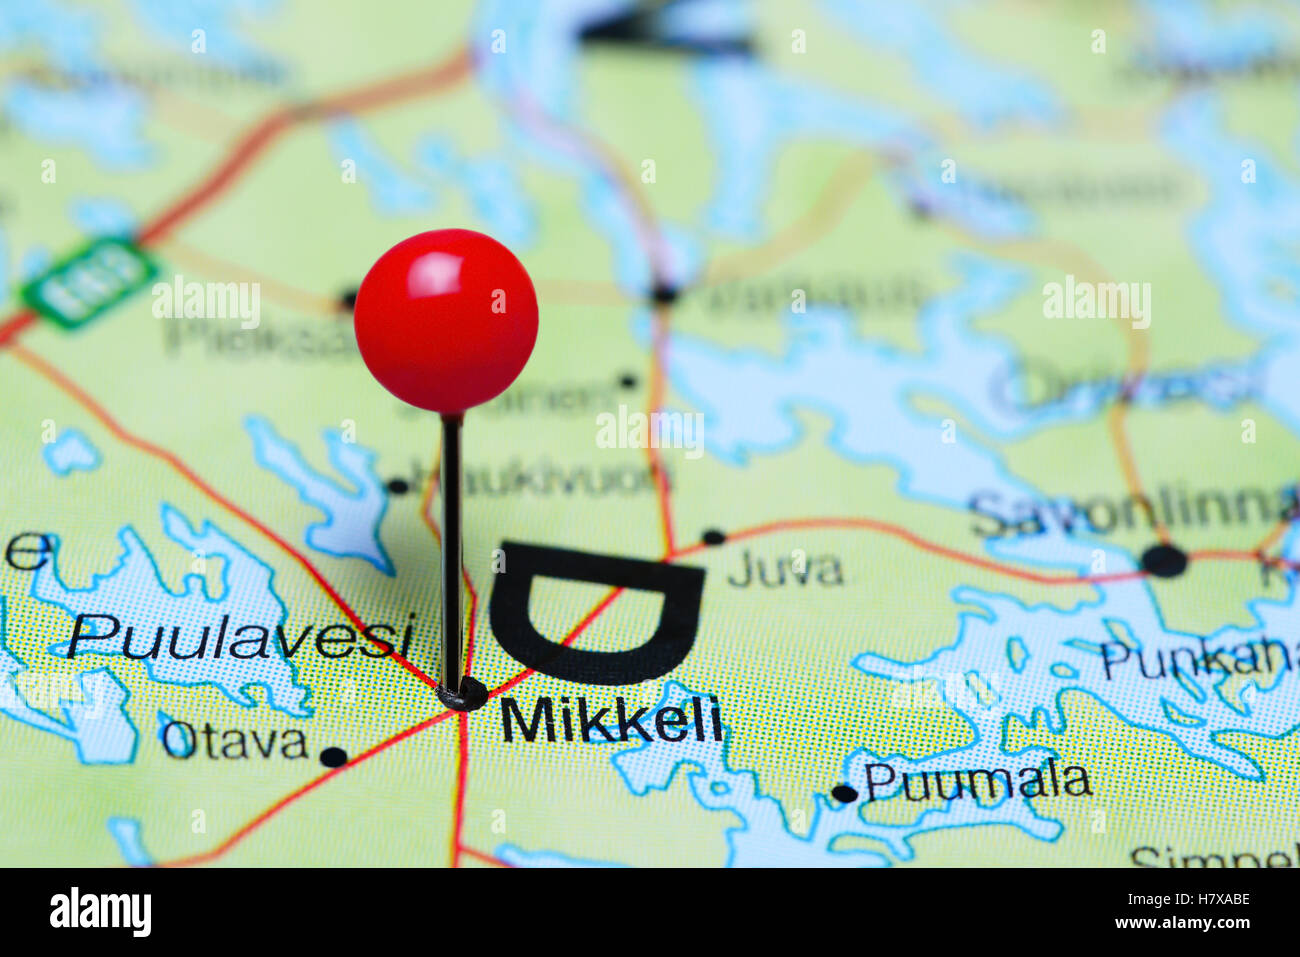 Mikkeli pinned on a map of Finland Stock Photo